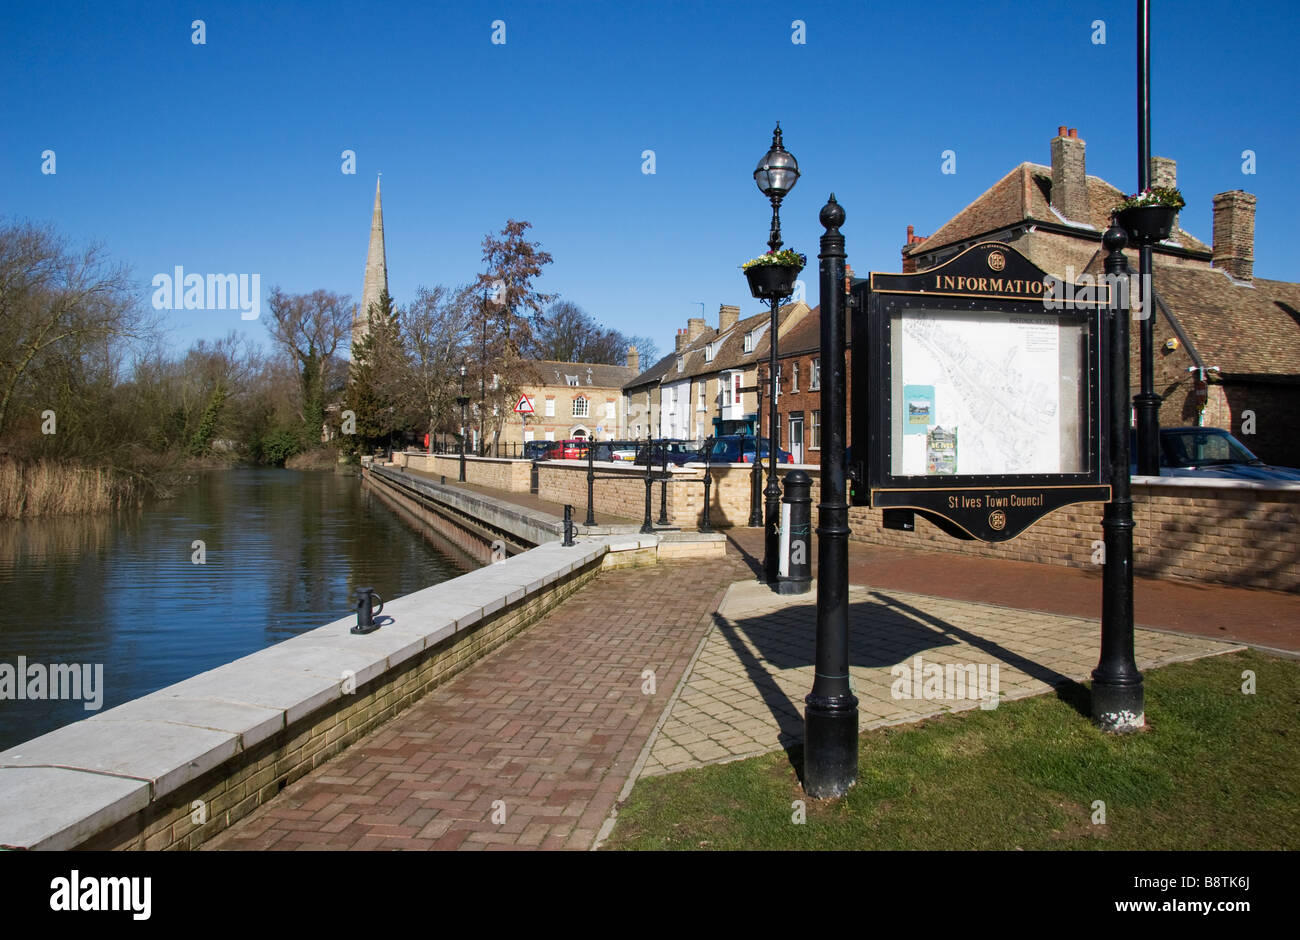 The quay at 'The Waits' in 'St Ives', Cambridgeshire, England, UK. Stock Photo